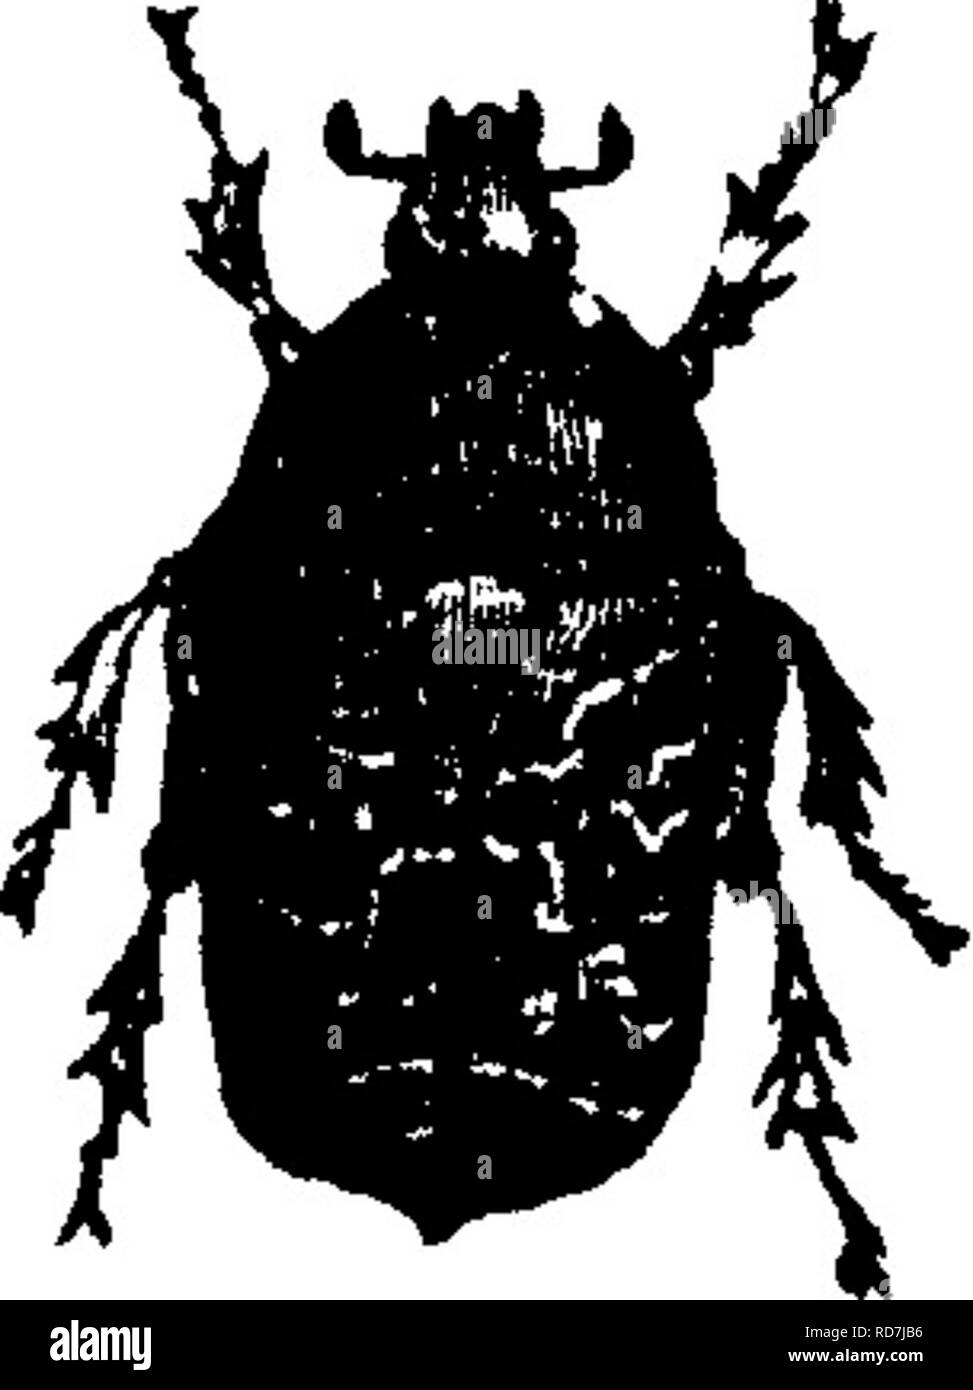 . Insects injurious to fruits. Illustrated with four hundred and forty wood-cuts. Insect pests. 1^0 INSECTS INJURIOUS TO THE PEAR. No. 82.—The Melancholy Cetonia. Euphoria melancholica (Gory). This insect belongs to the same genus as the Indian Cetonia (Xo. 81), and is very similar to it in appearance and habits, but is somewhat smaller. (See Fig. 169.) 169. This beetle has also been found eating into ripe pears, and occasionally apples. It is found in the South in cotton-bolls, in the holes left by the boll- worm. It appears to frequent the bolls for the purpose of consuming the exuding sap.. Stock Photo